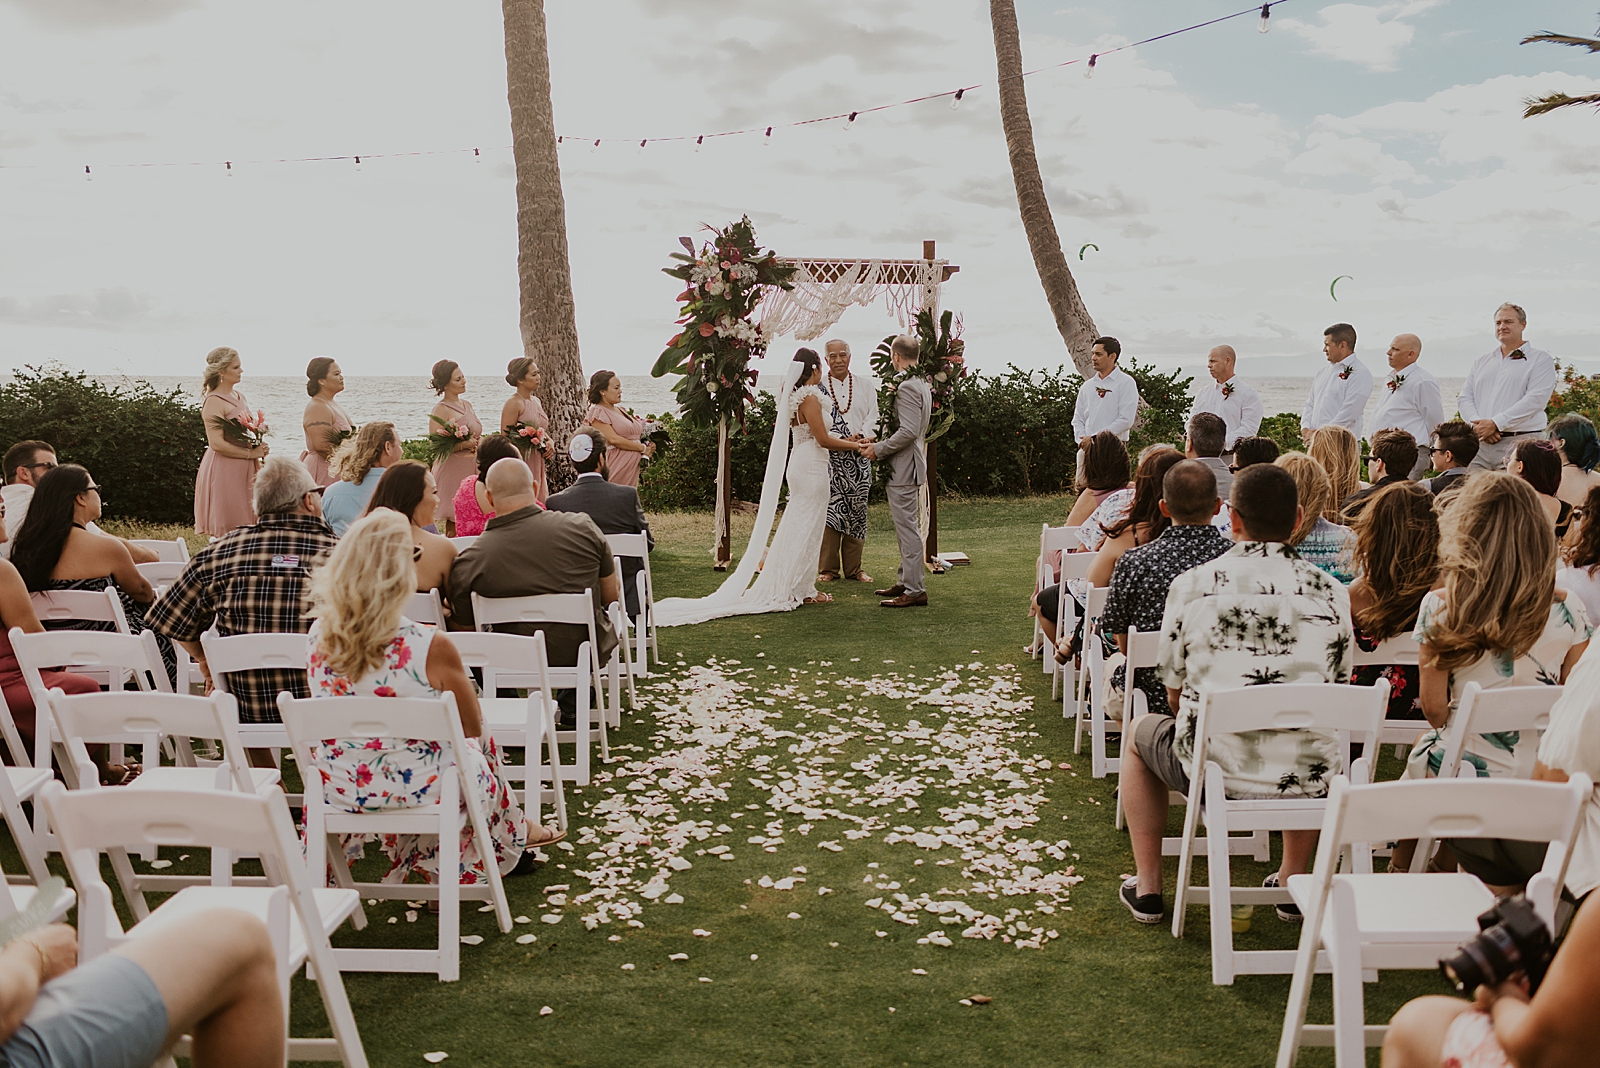 Wide shot of Bride and Groom in front of officiant with wedding party and guests for outdoor Ceremony in front of the ocean